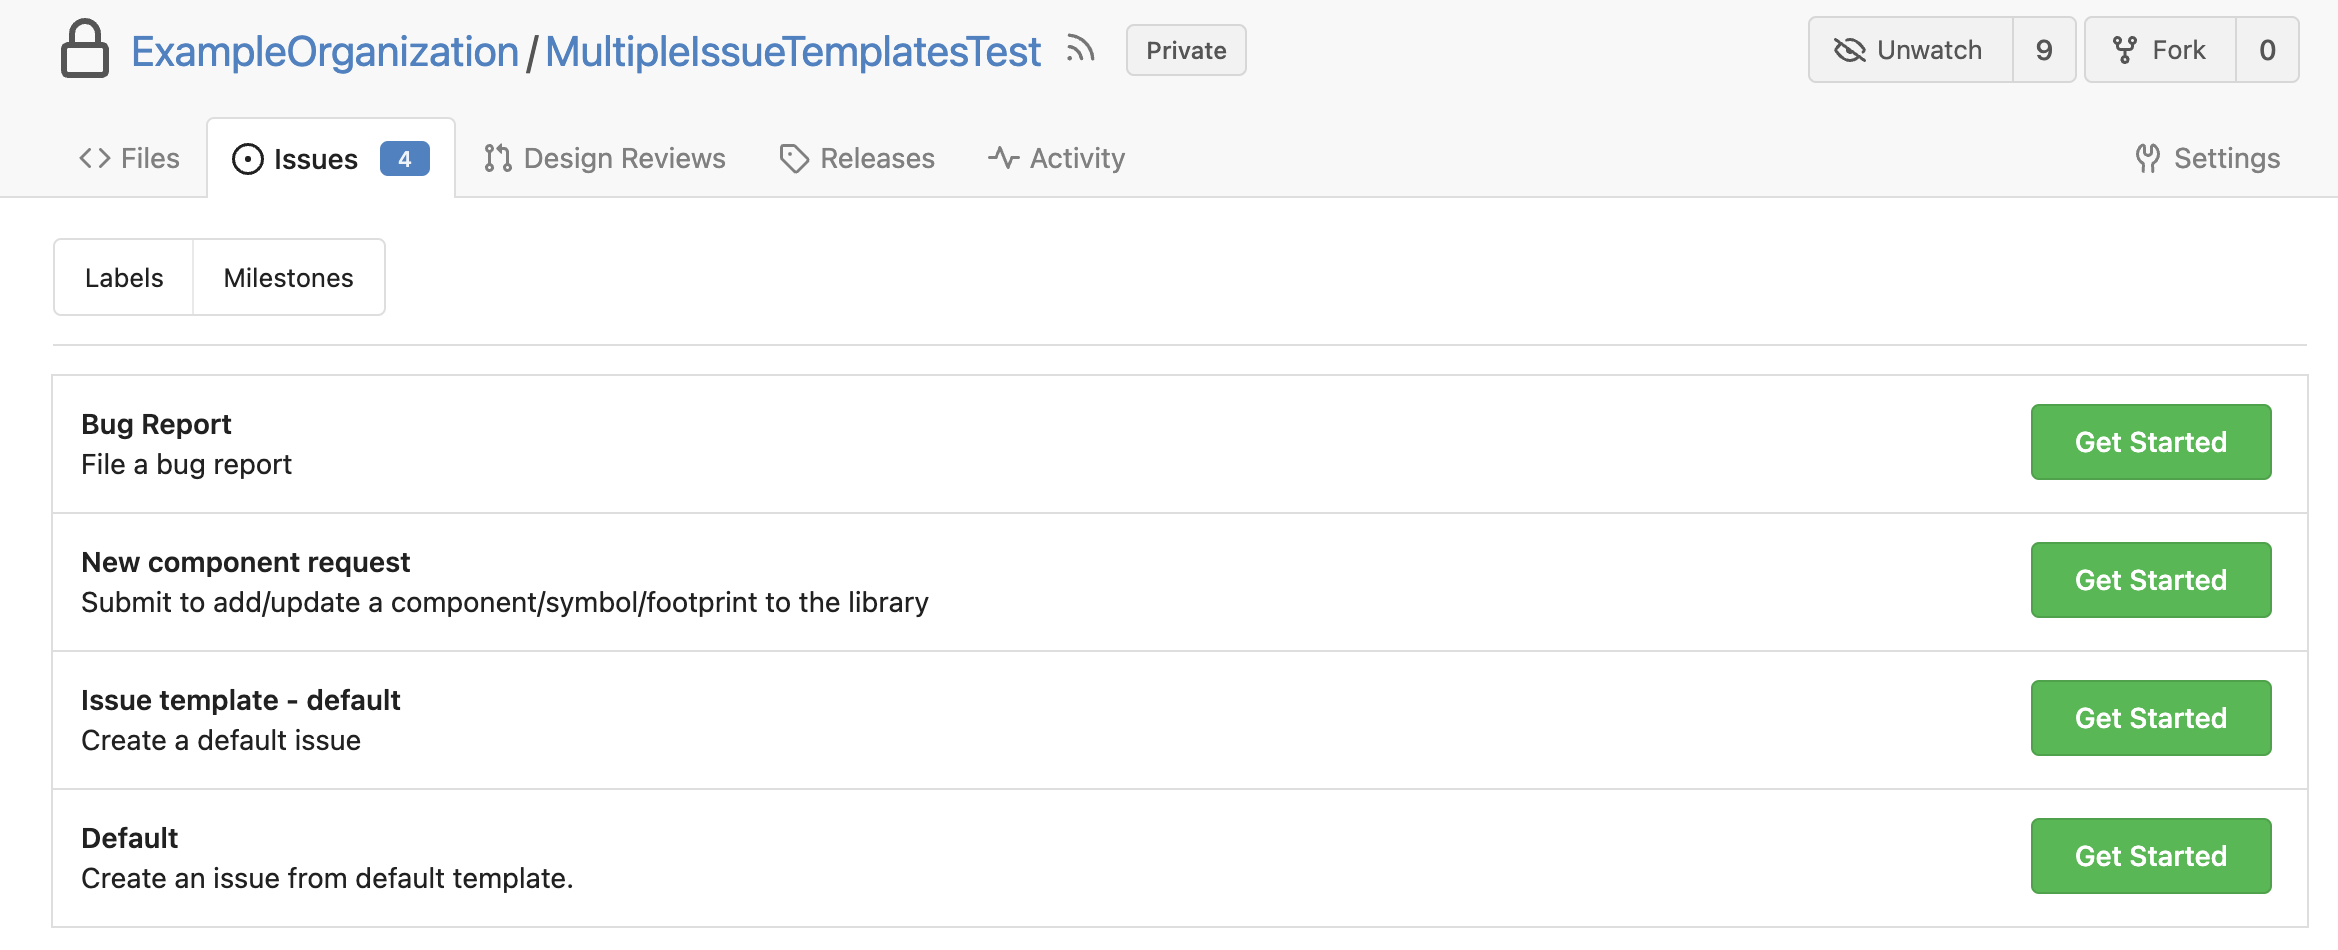 List of templates in issue tab including bug report, new component request, issue template - default, and default.